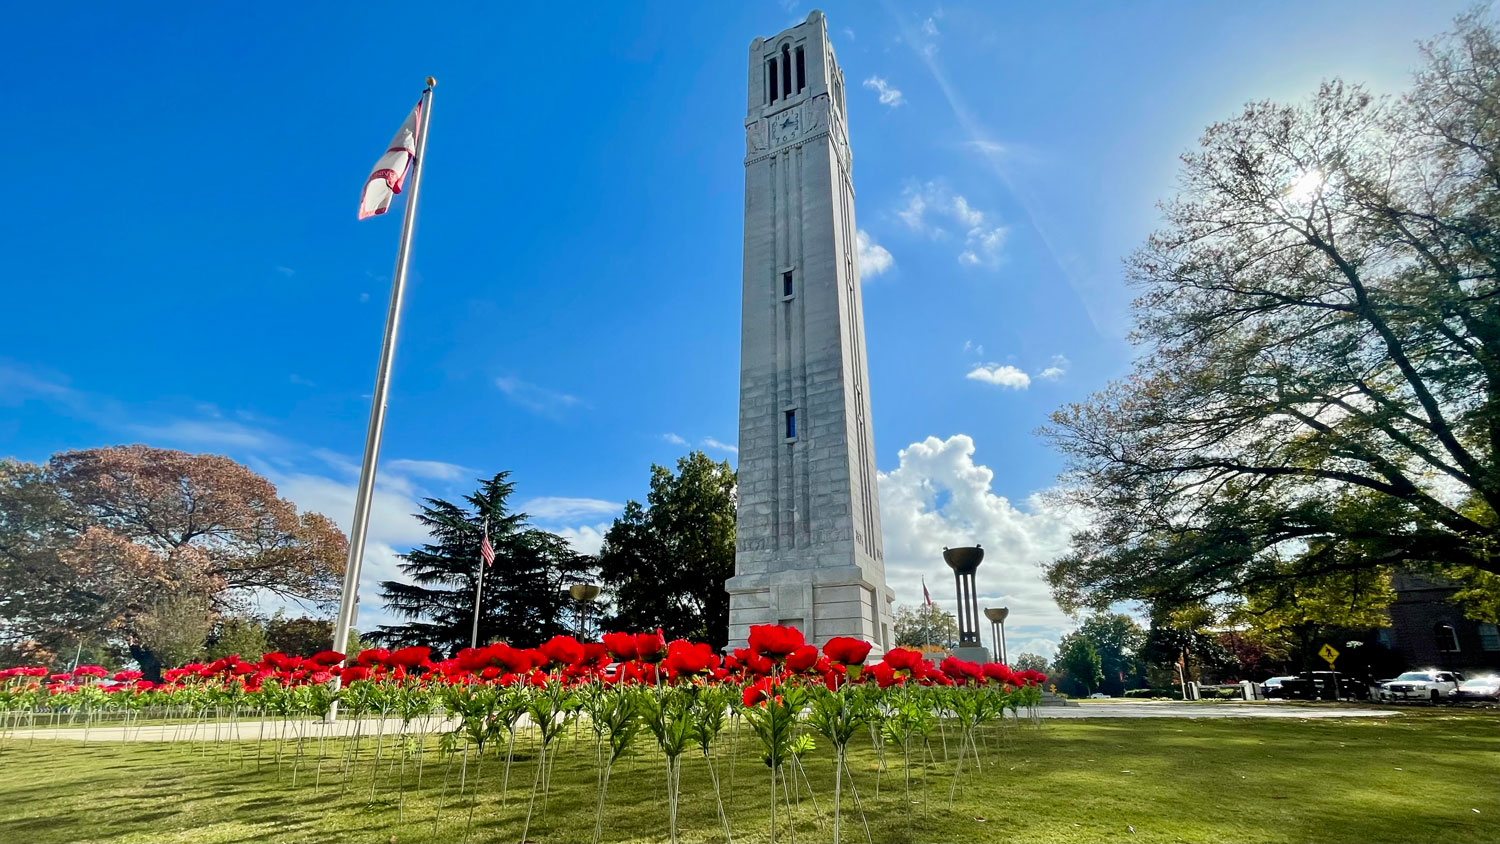 The Belltower with flowers in the foreground, during a sunny day.